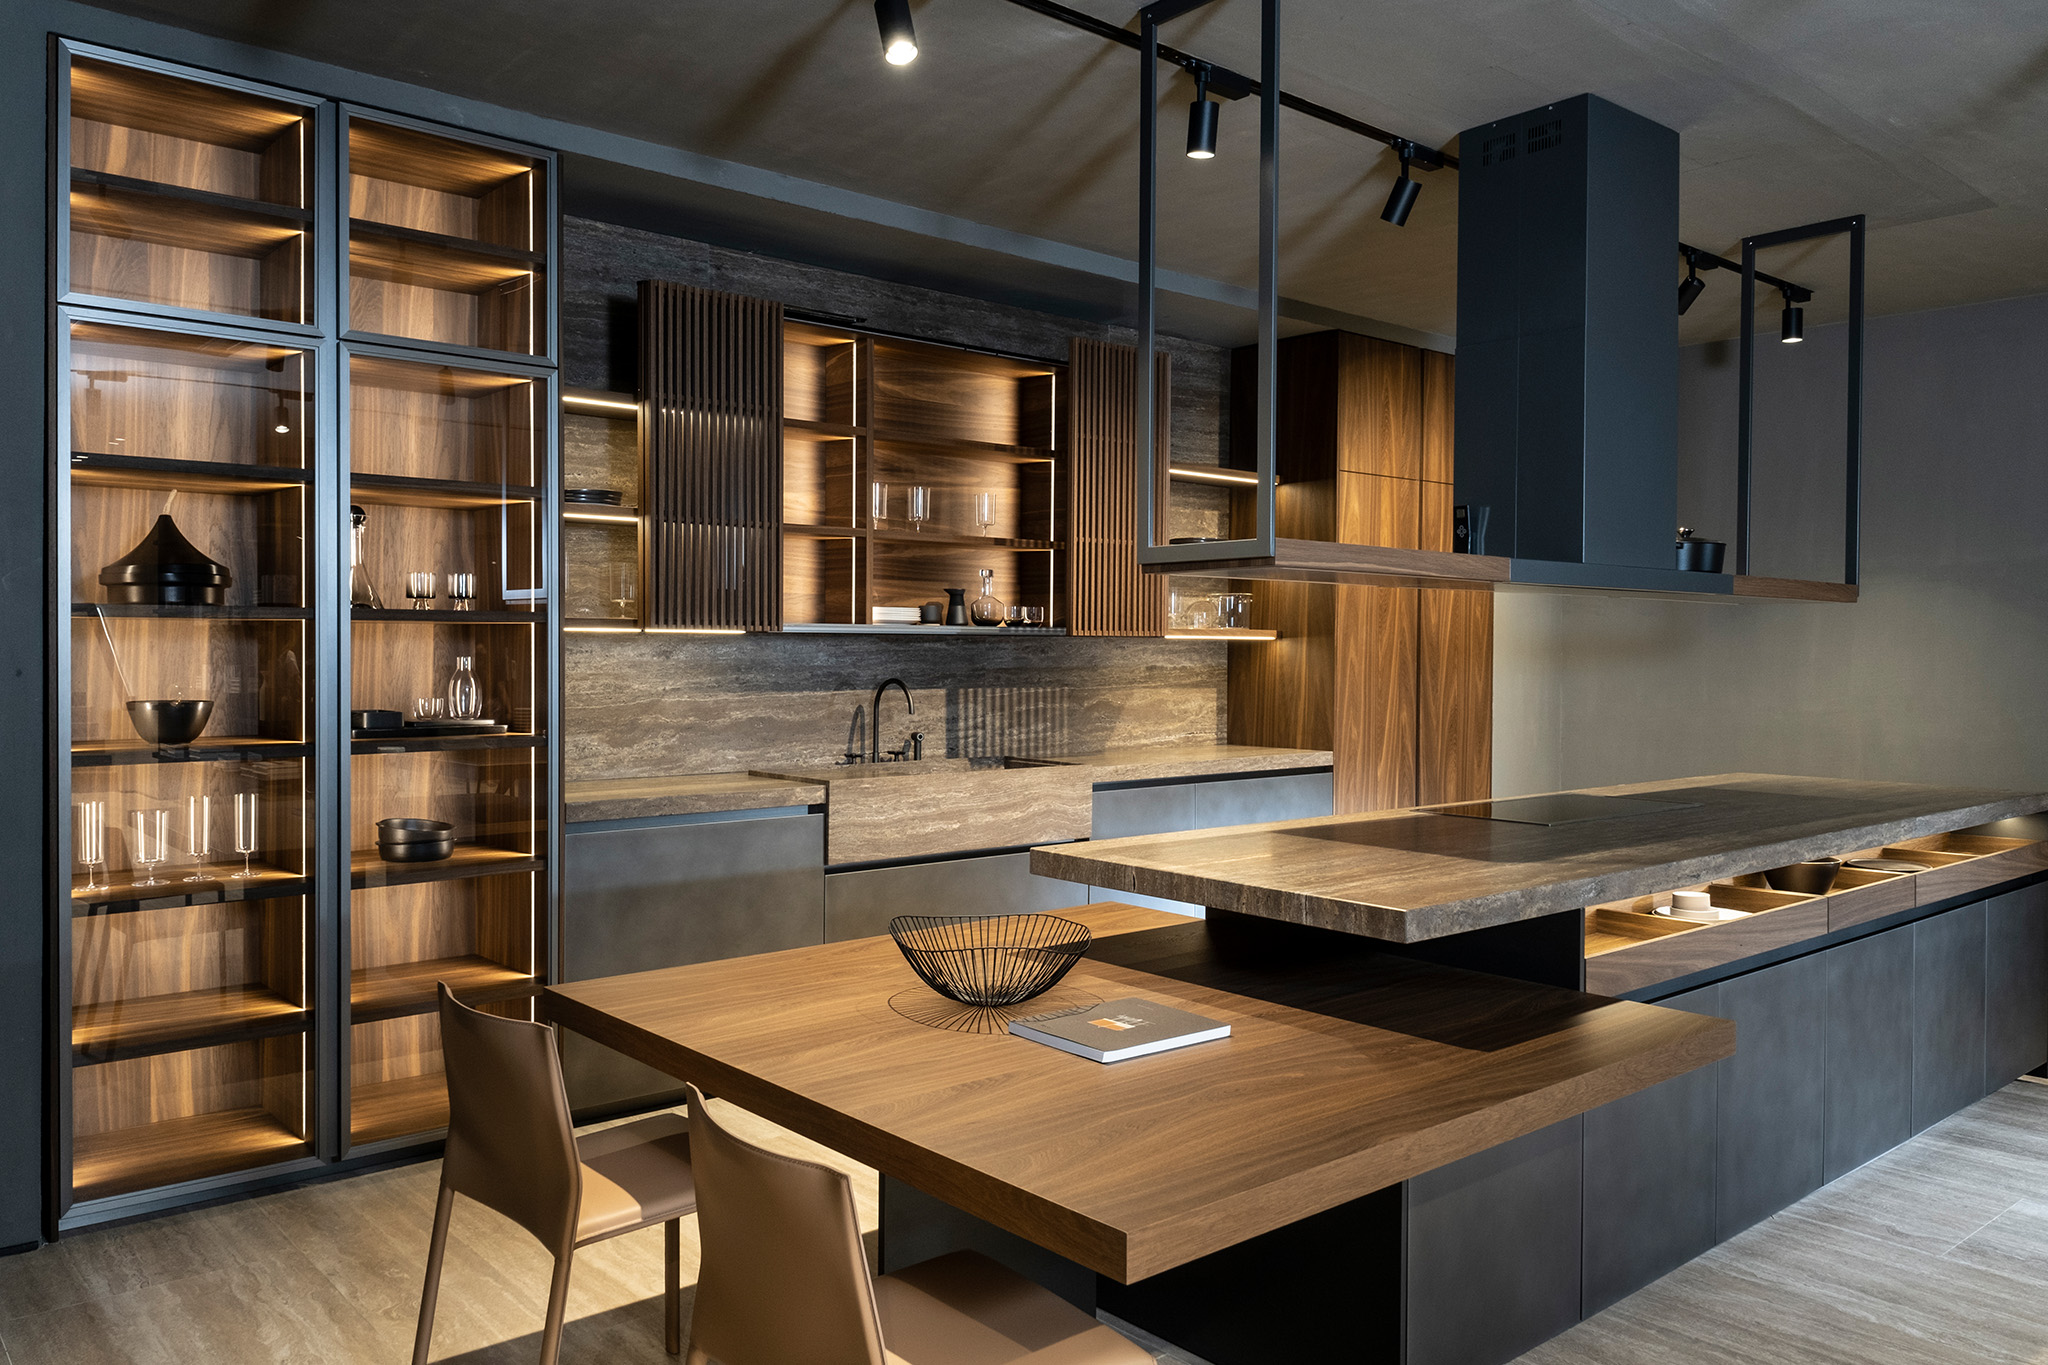 A modern kitchen with wooden countertops and shelves with a mixture of stone and metal accents.